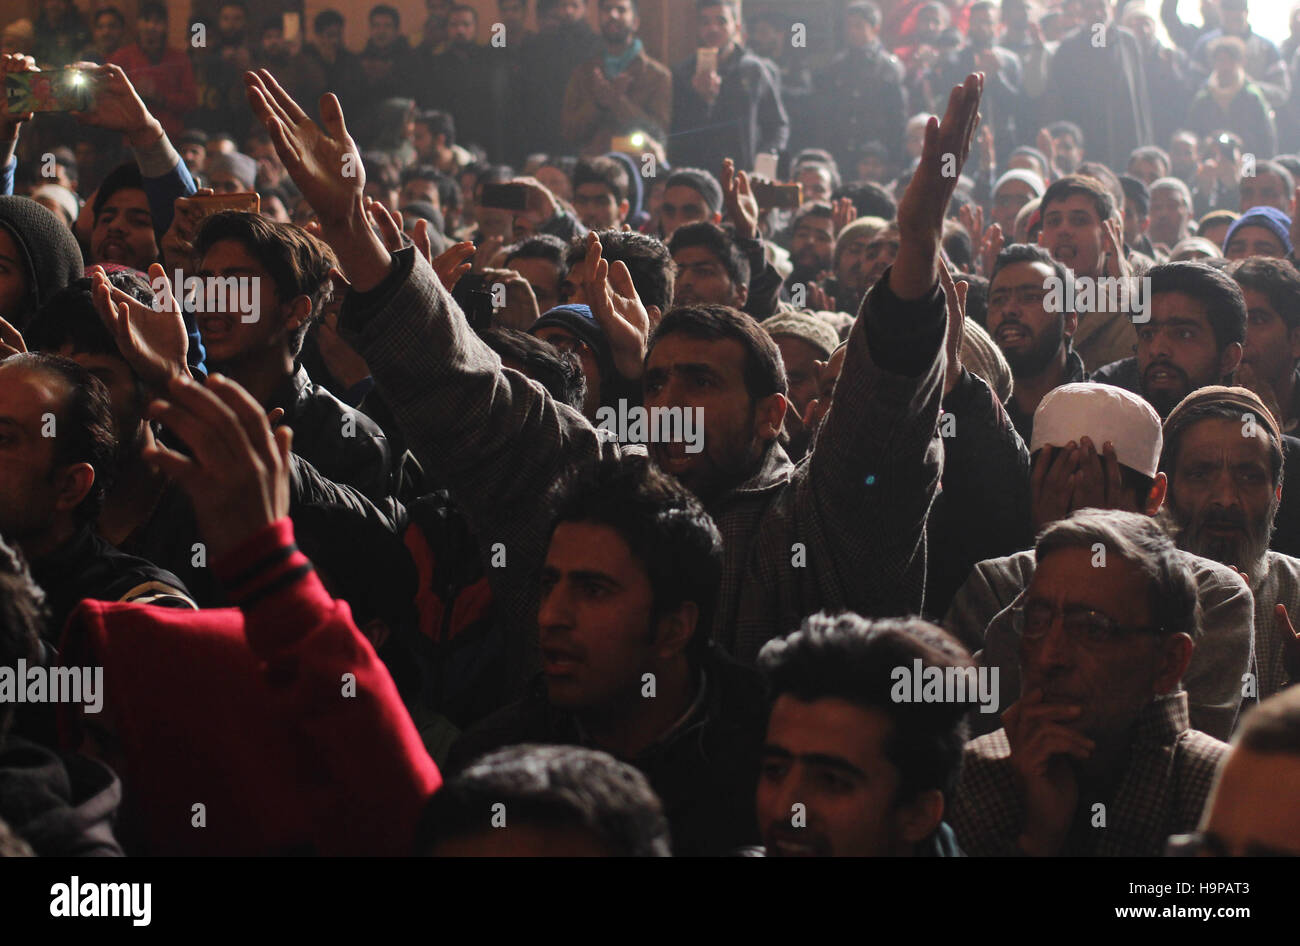 Srinagar, Kashmir. 25th Nov, 2016. Kashmiri Muslim raising hands while praying for the freedom of Kashmir at the historic Jamia Masjid on Friday, November 25, Indian Controlled Kashmir. Jamia Masjid Srinagar remained under siege since July 8 of this year following the uprising triggered after the killing of Hizb commander Burhan Wani. At least 95 were killed while several thousand civilians were maimed and blinded during the ongoing uprising in the Valley. Credit:  Umer Asif/Pacific Press/Alamy Live News Stock Photo